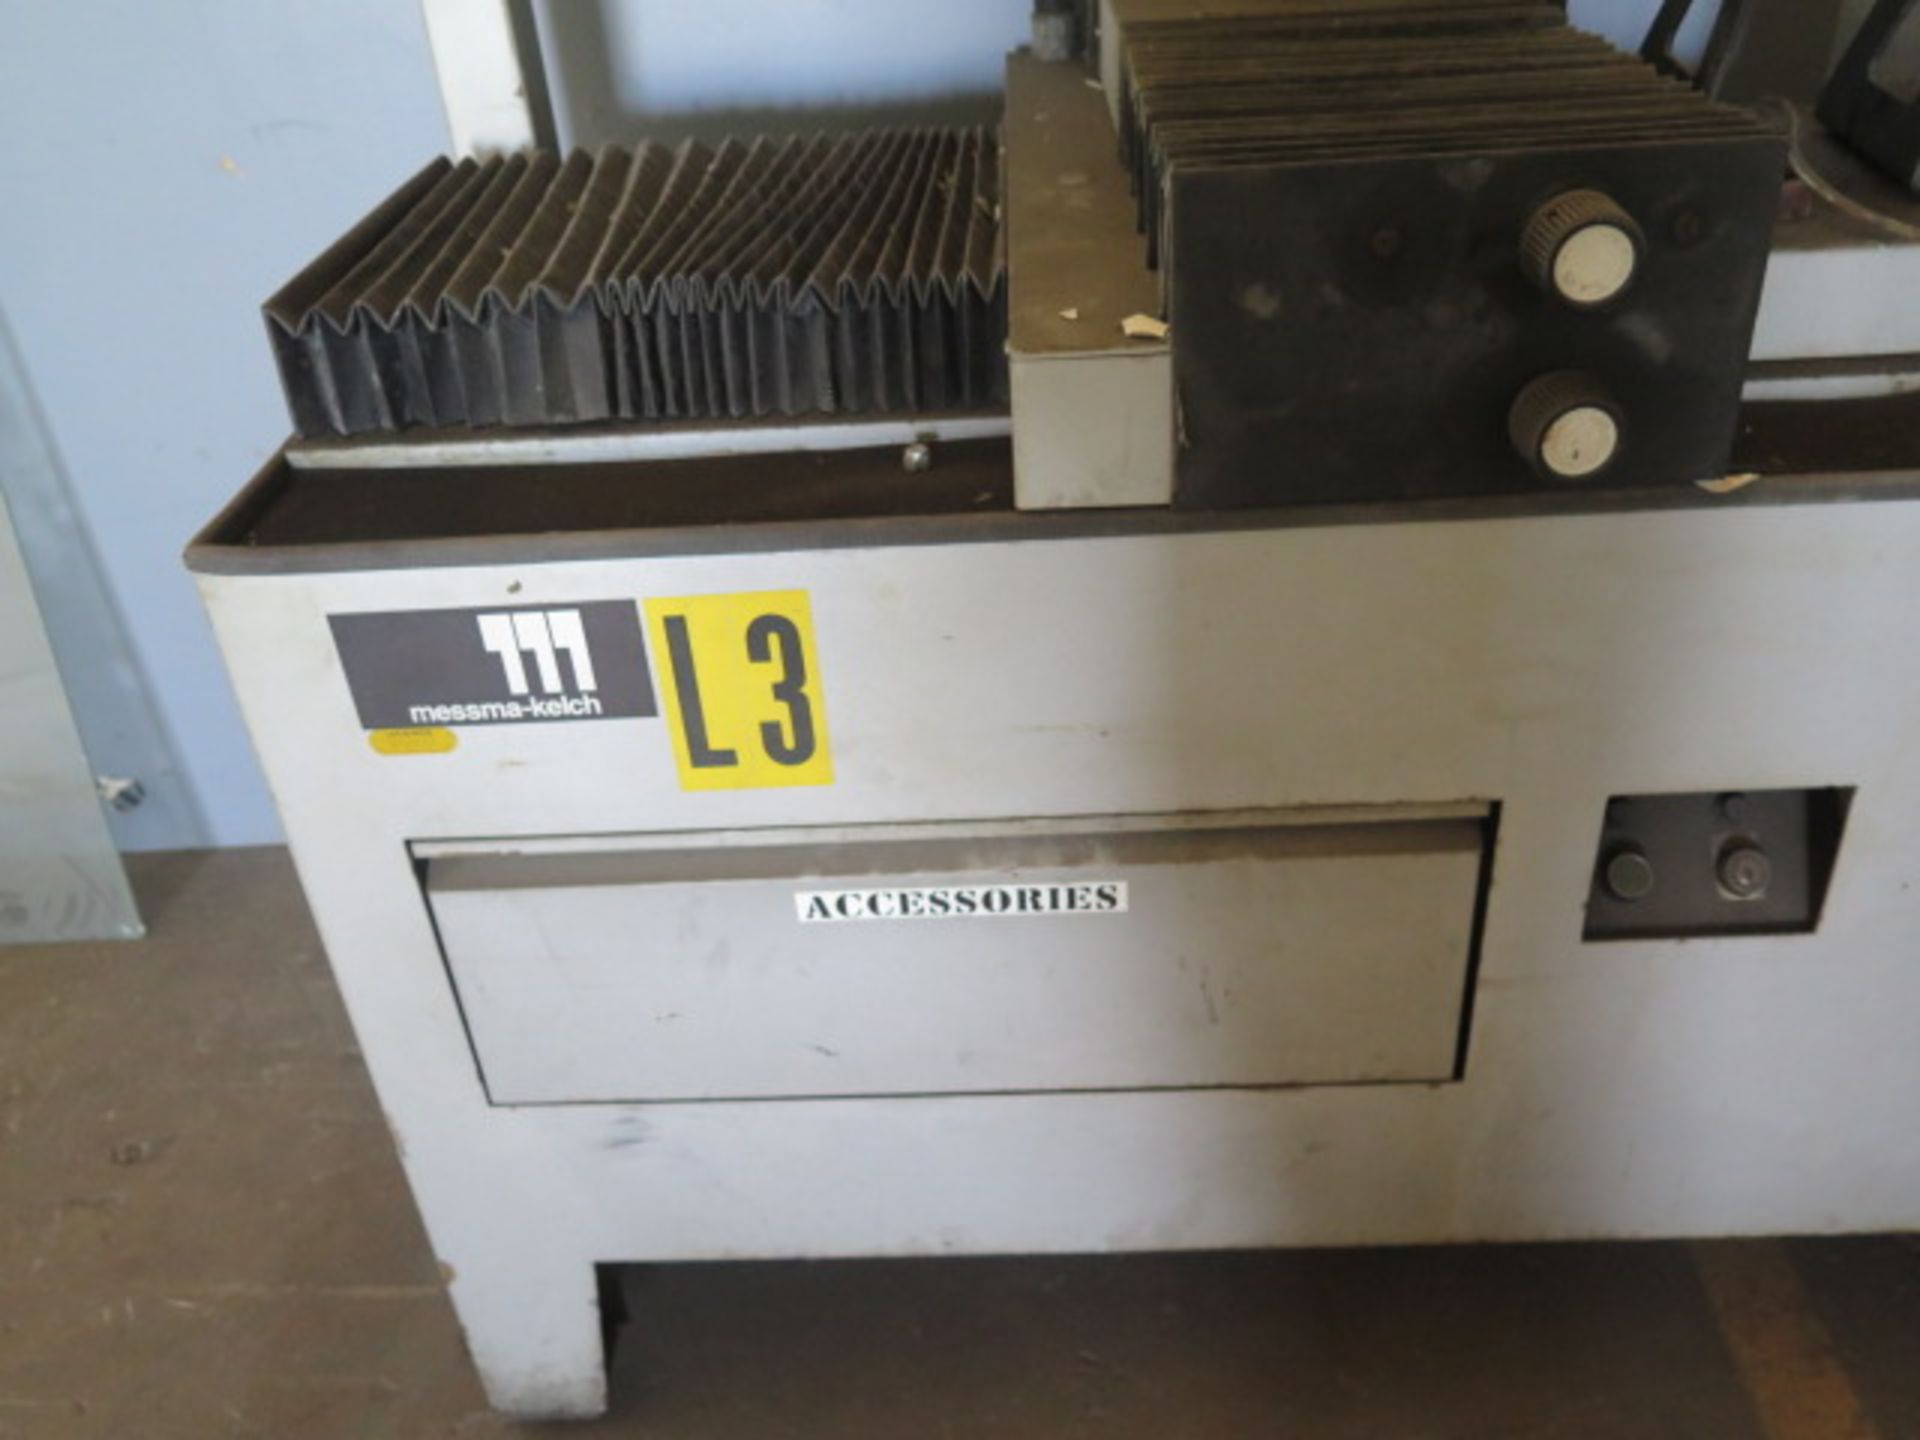 Messma-Kelch “Mini V” Tool Presetter w/ Messma Dig Controls, 40-Taper and 50-Taper, SOLD AS IS - Image 10 of 12